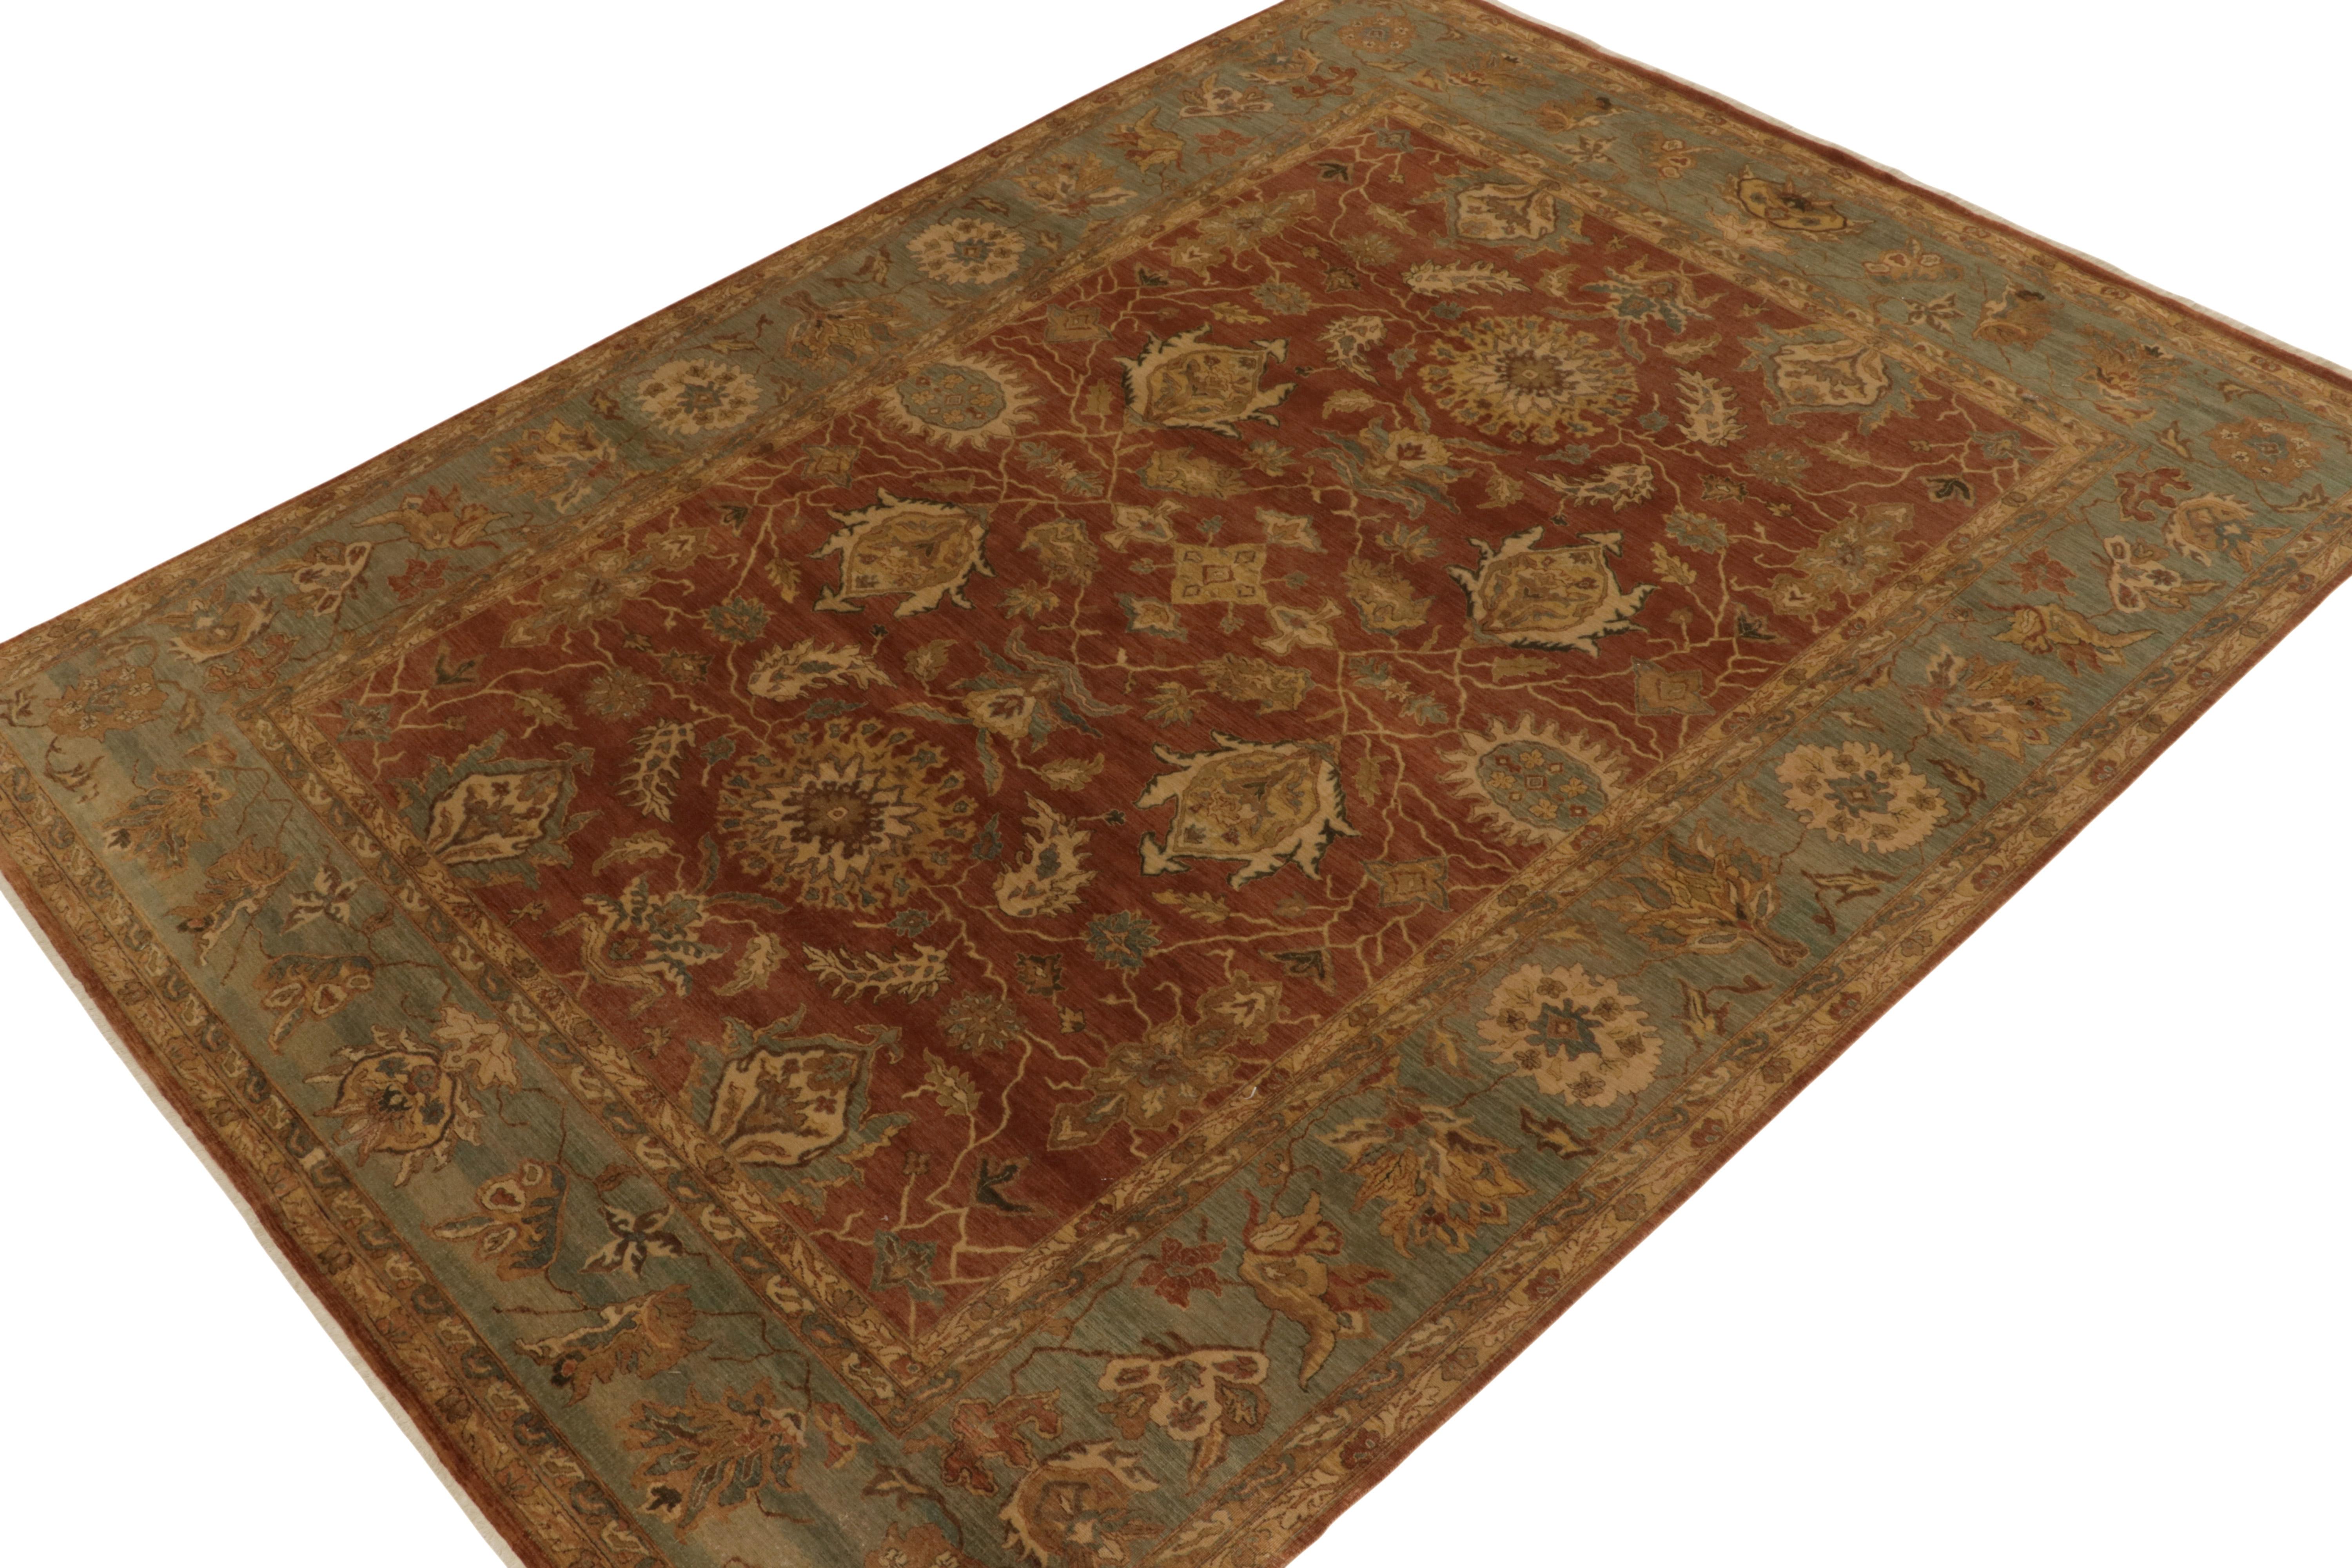 Handknotted in wool, this 9x12 contemporary rug from our Modern Classics collection is particularly inspired by antique Tabriz rugs. 

On the Design: The gracious scale depicts a regal all over floral pattern in gentle beige and blue resting on